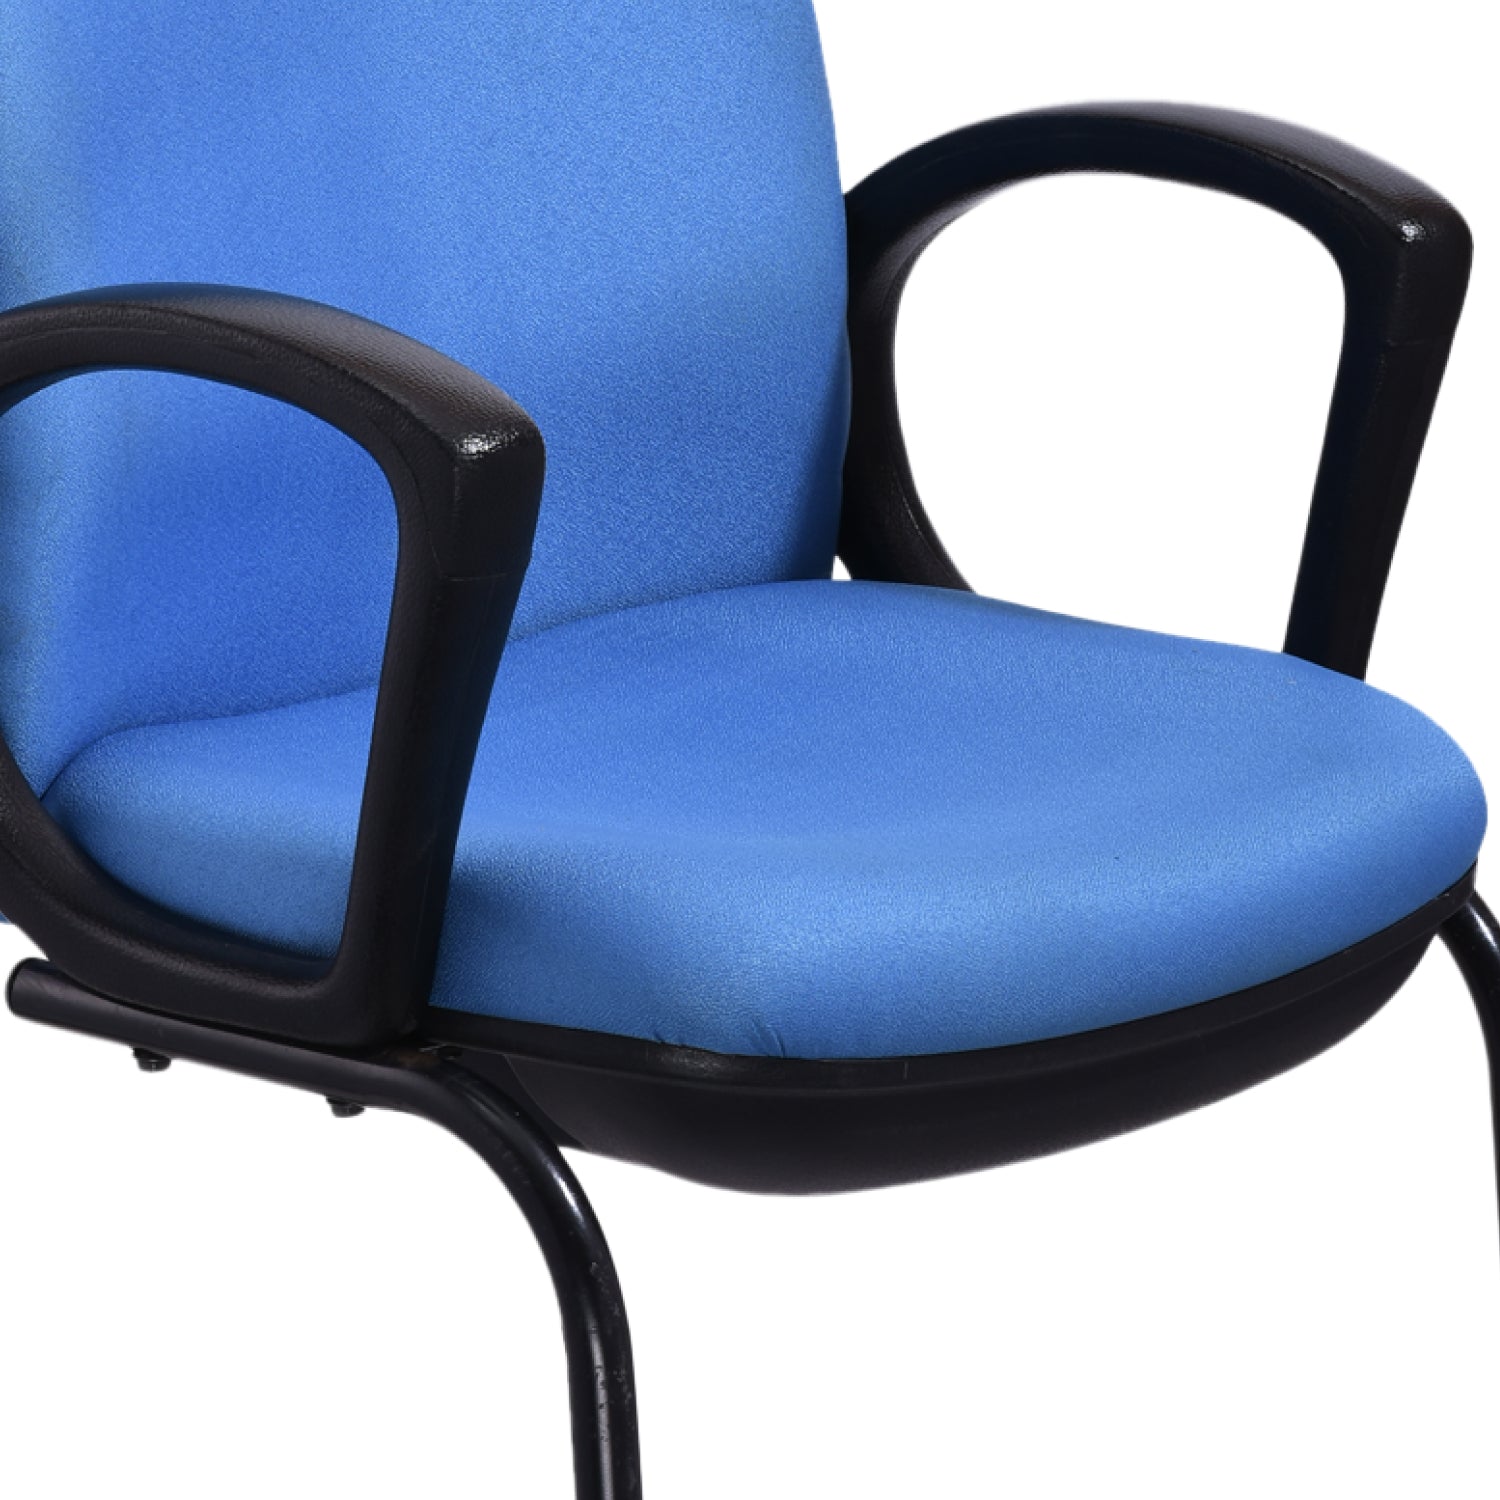 ZSV1028 Medium Back Chair by Zorin in Blue Color Zorin